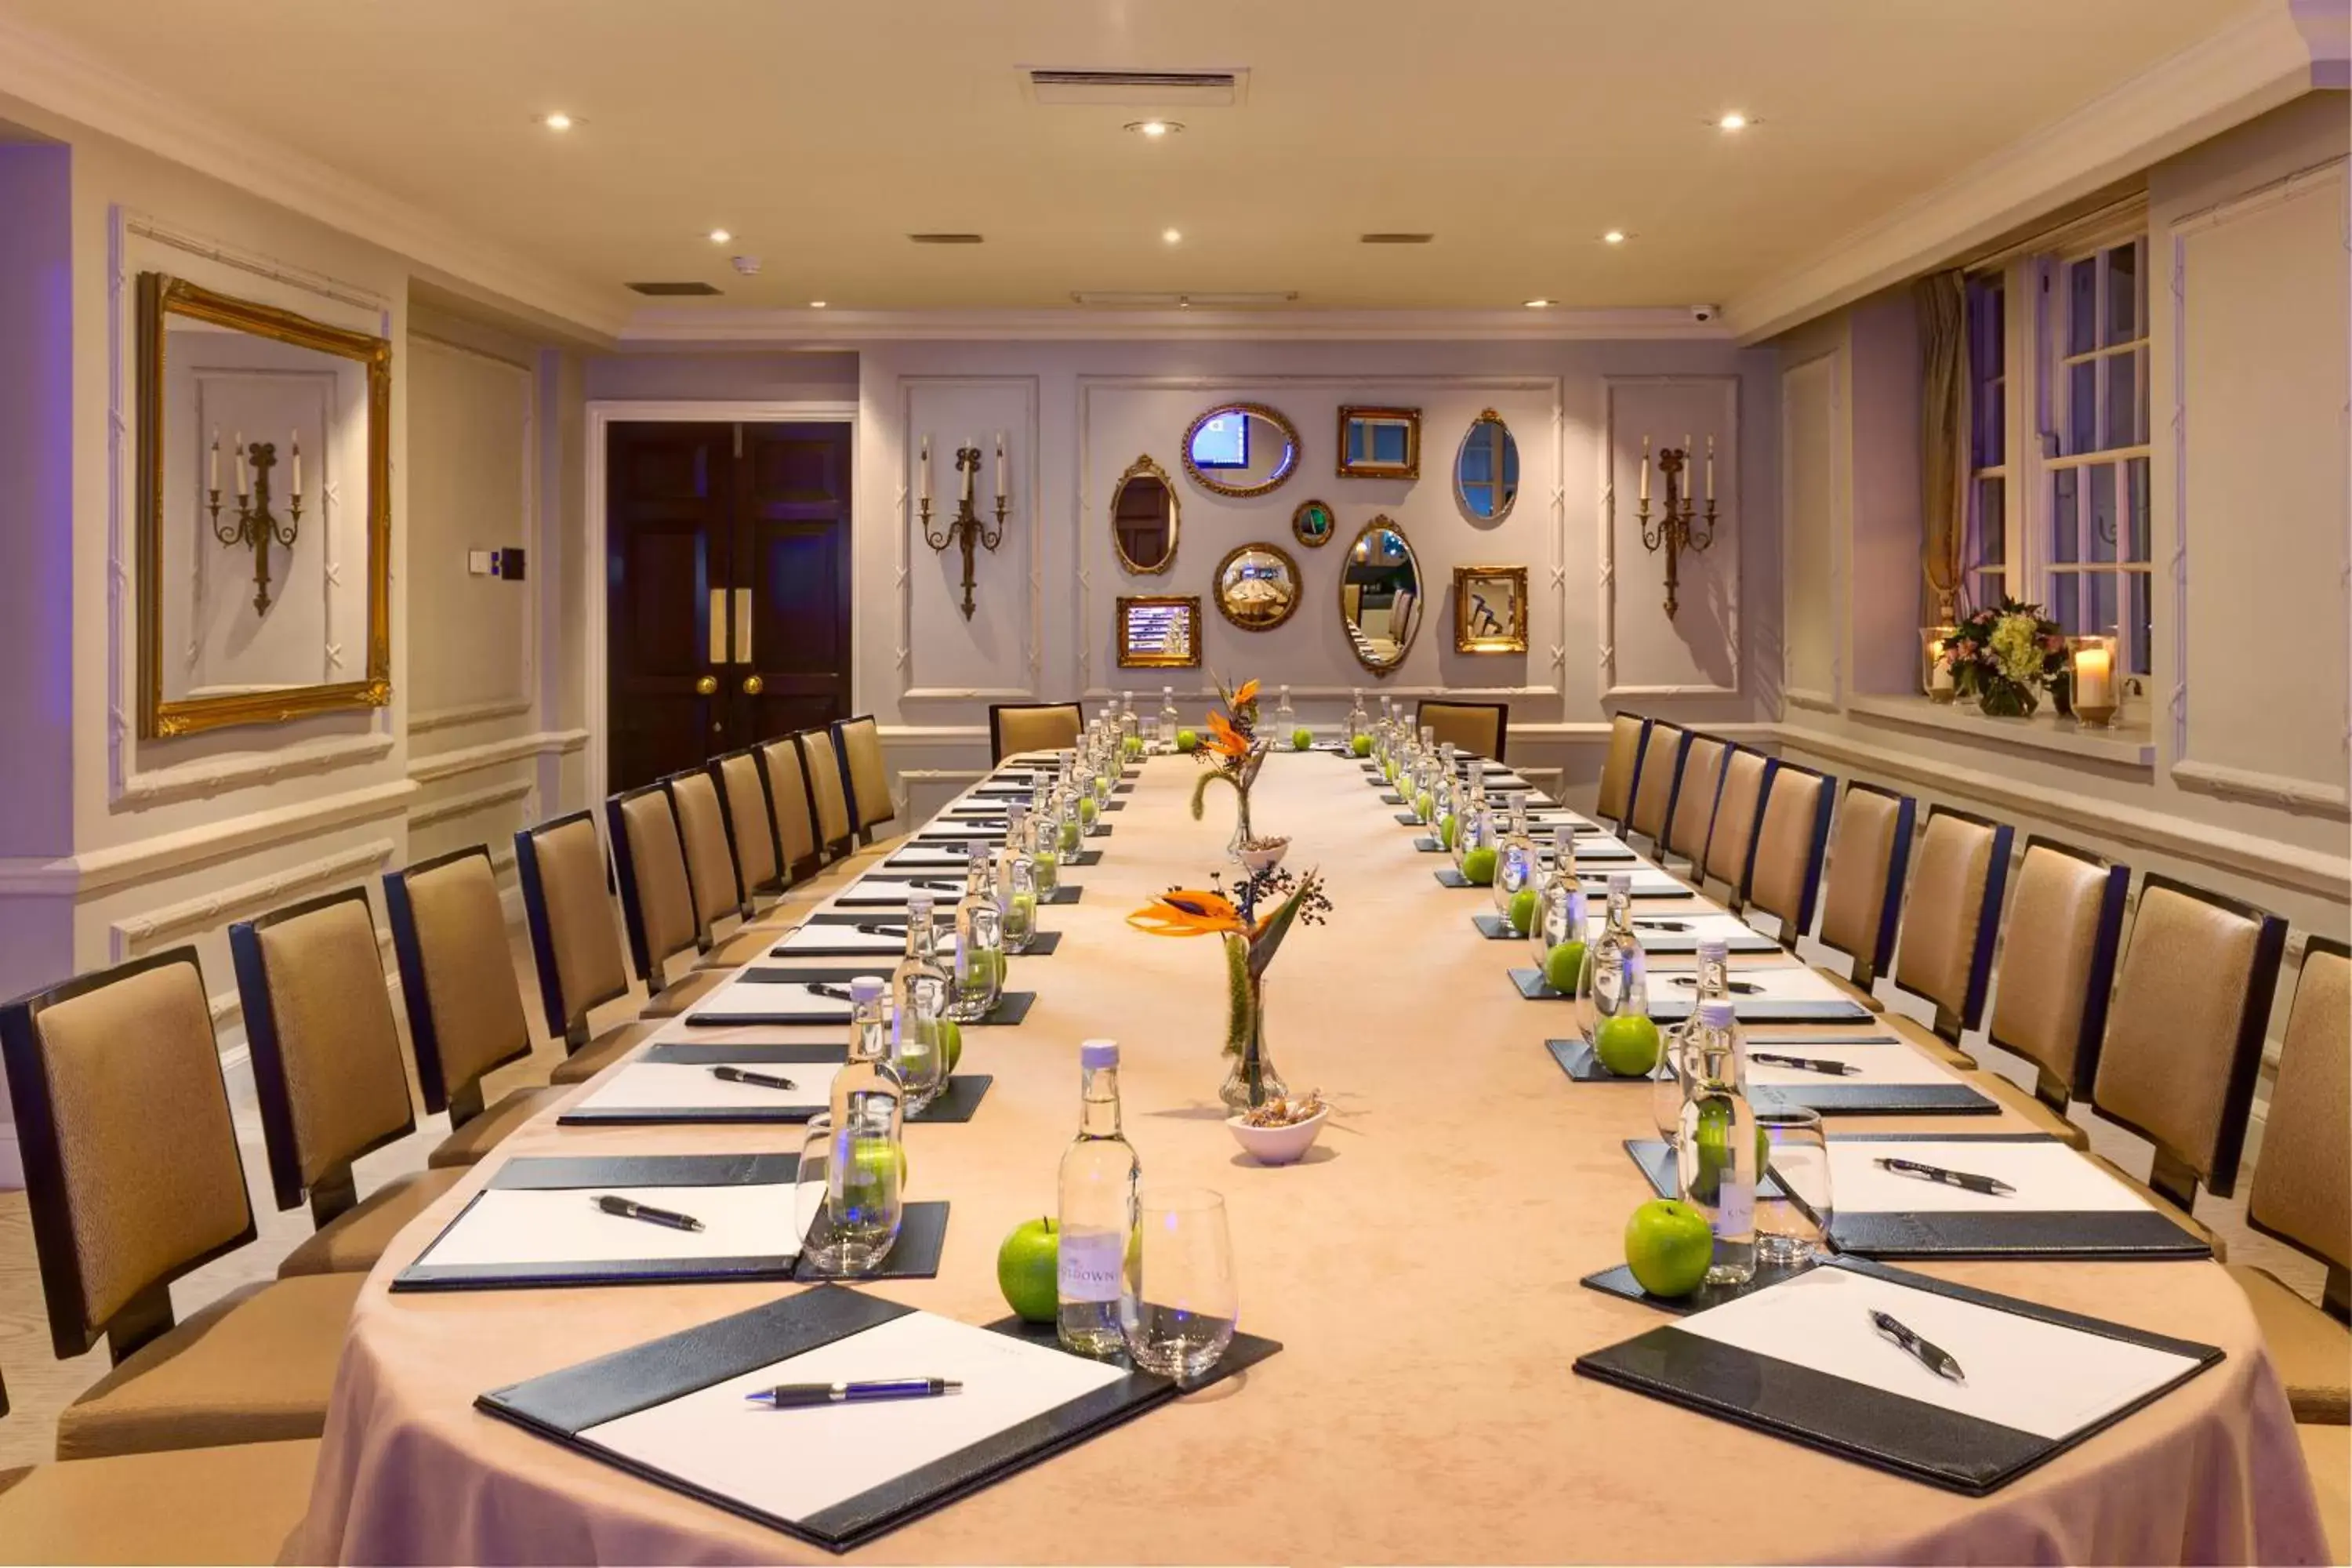 Business facilities in Dukes London